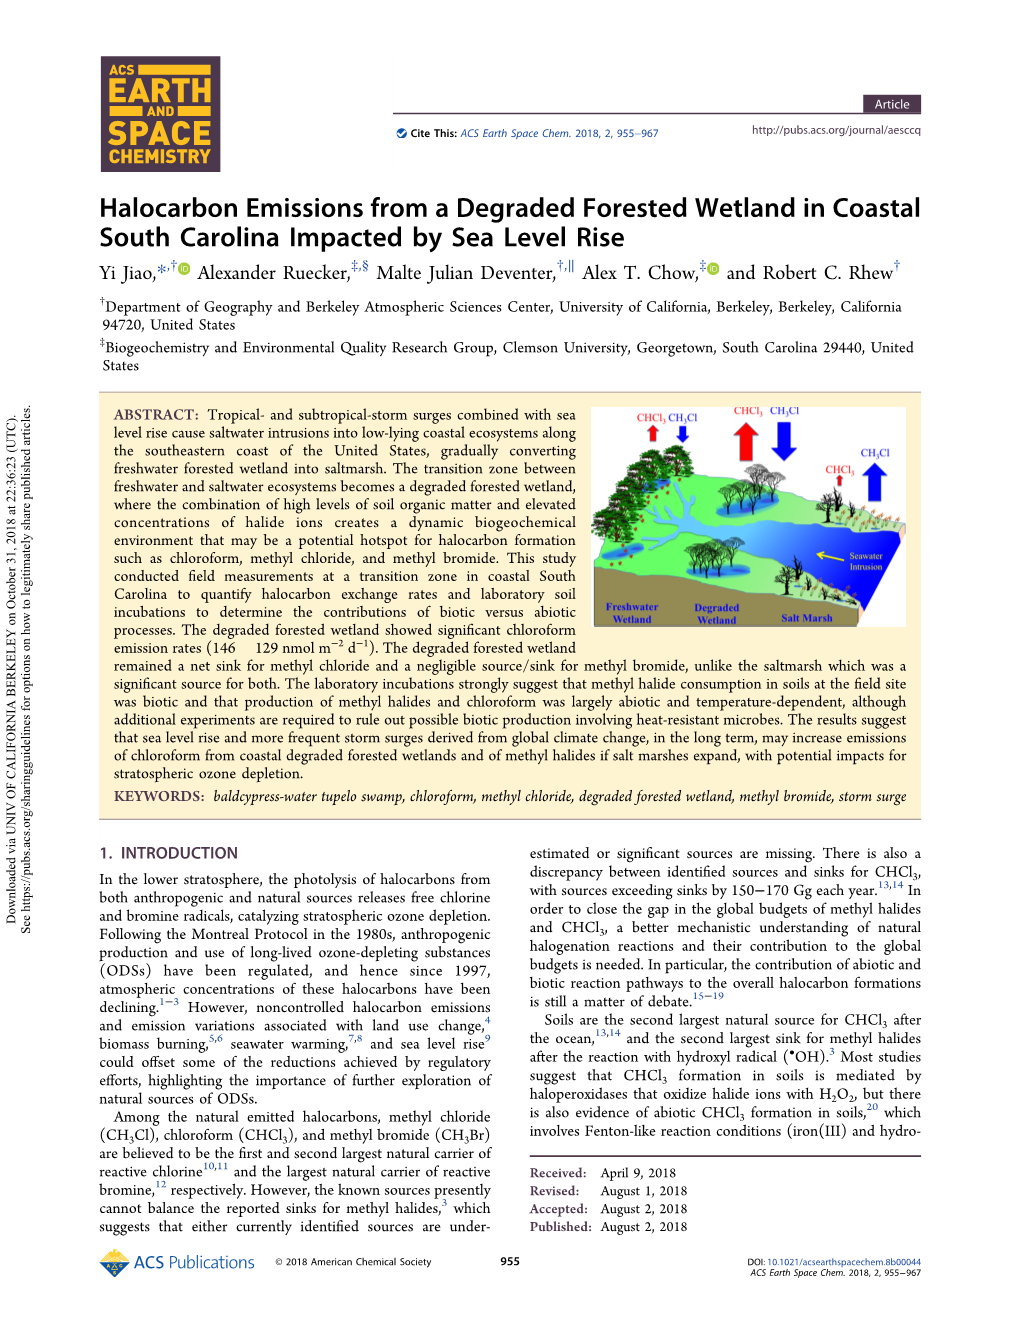 Halocarbon Emissions from a Degraded Forested Wetland In